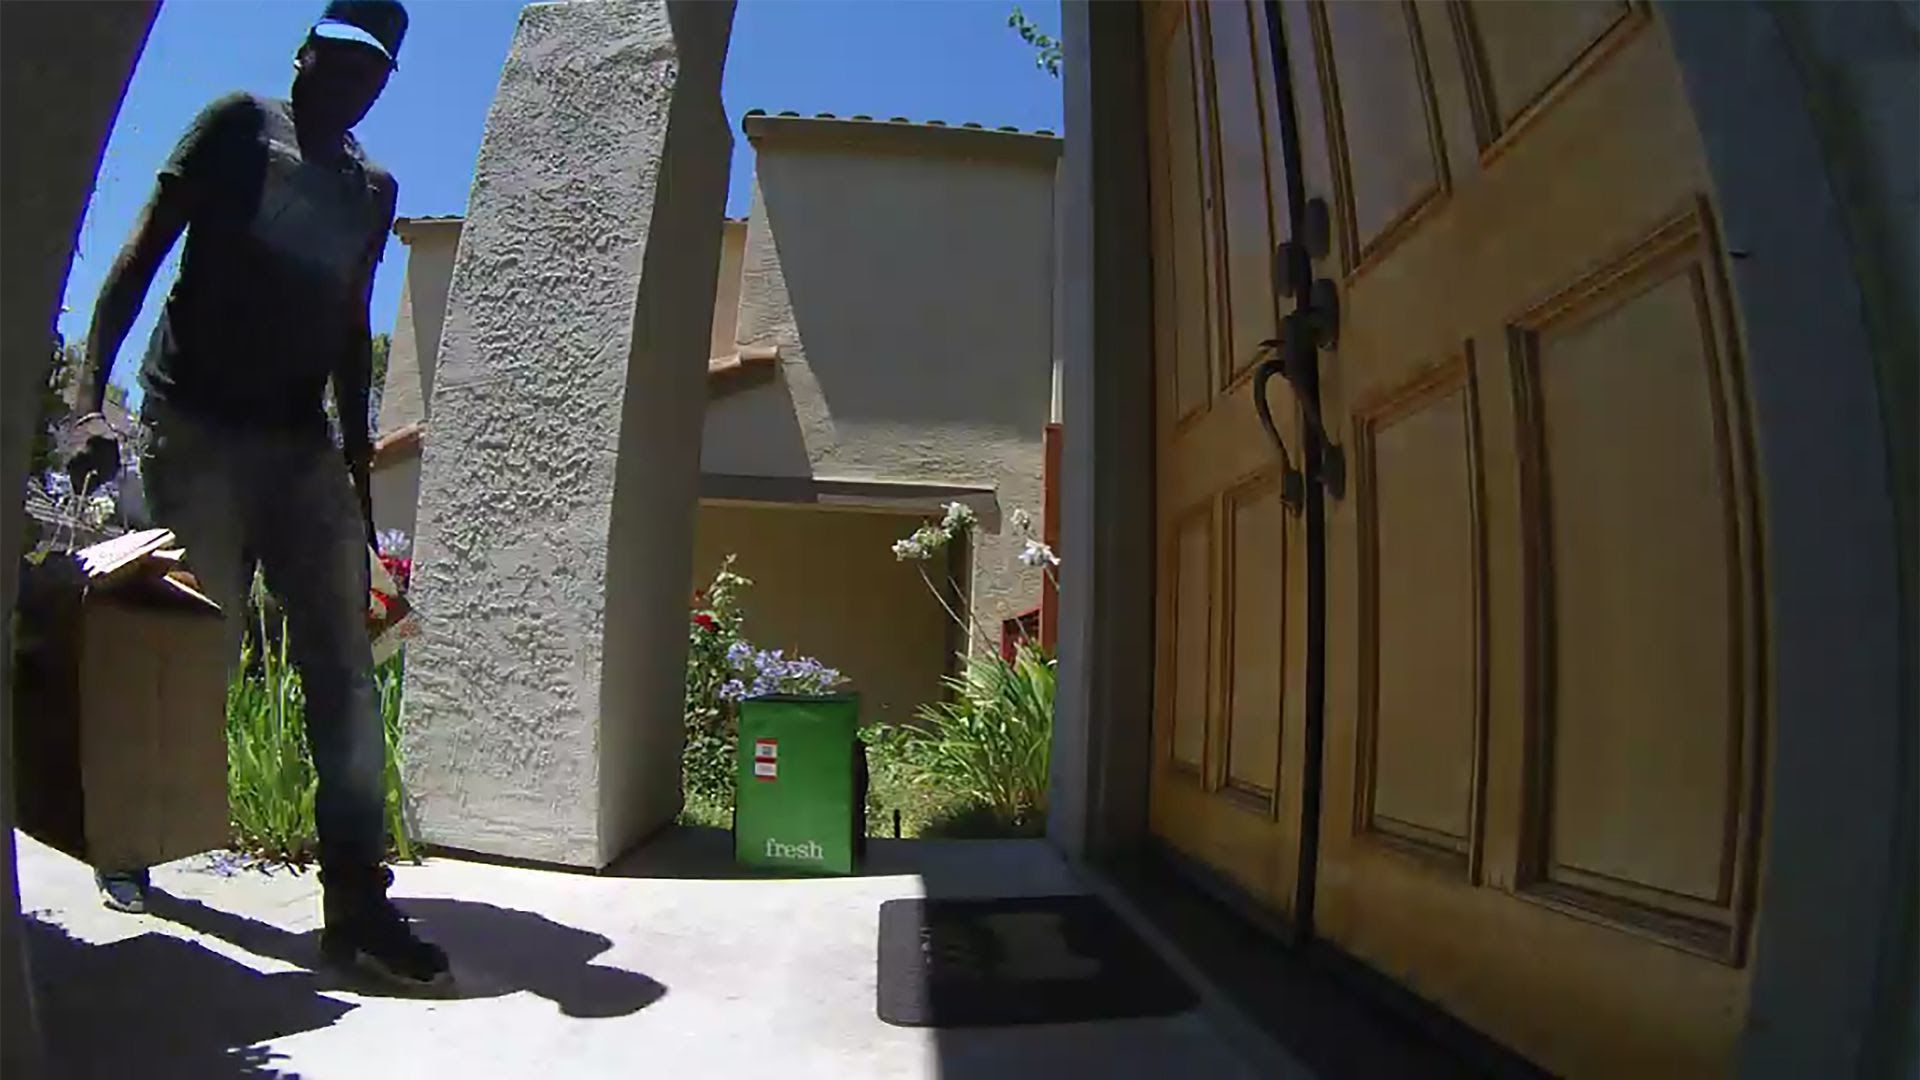 A man delivers a package to a door. 